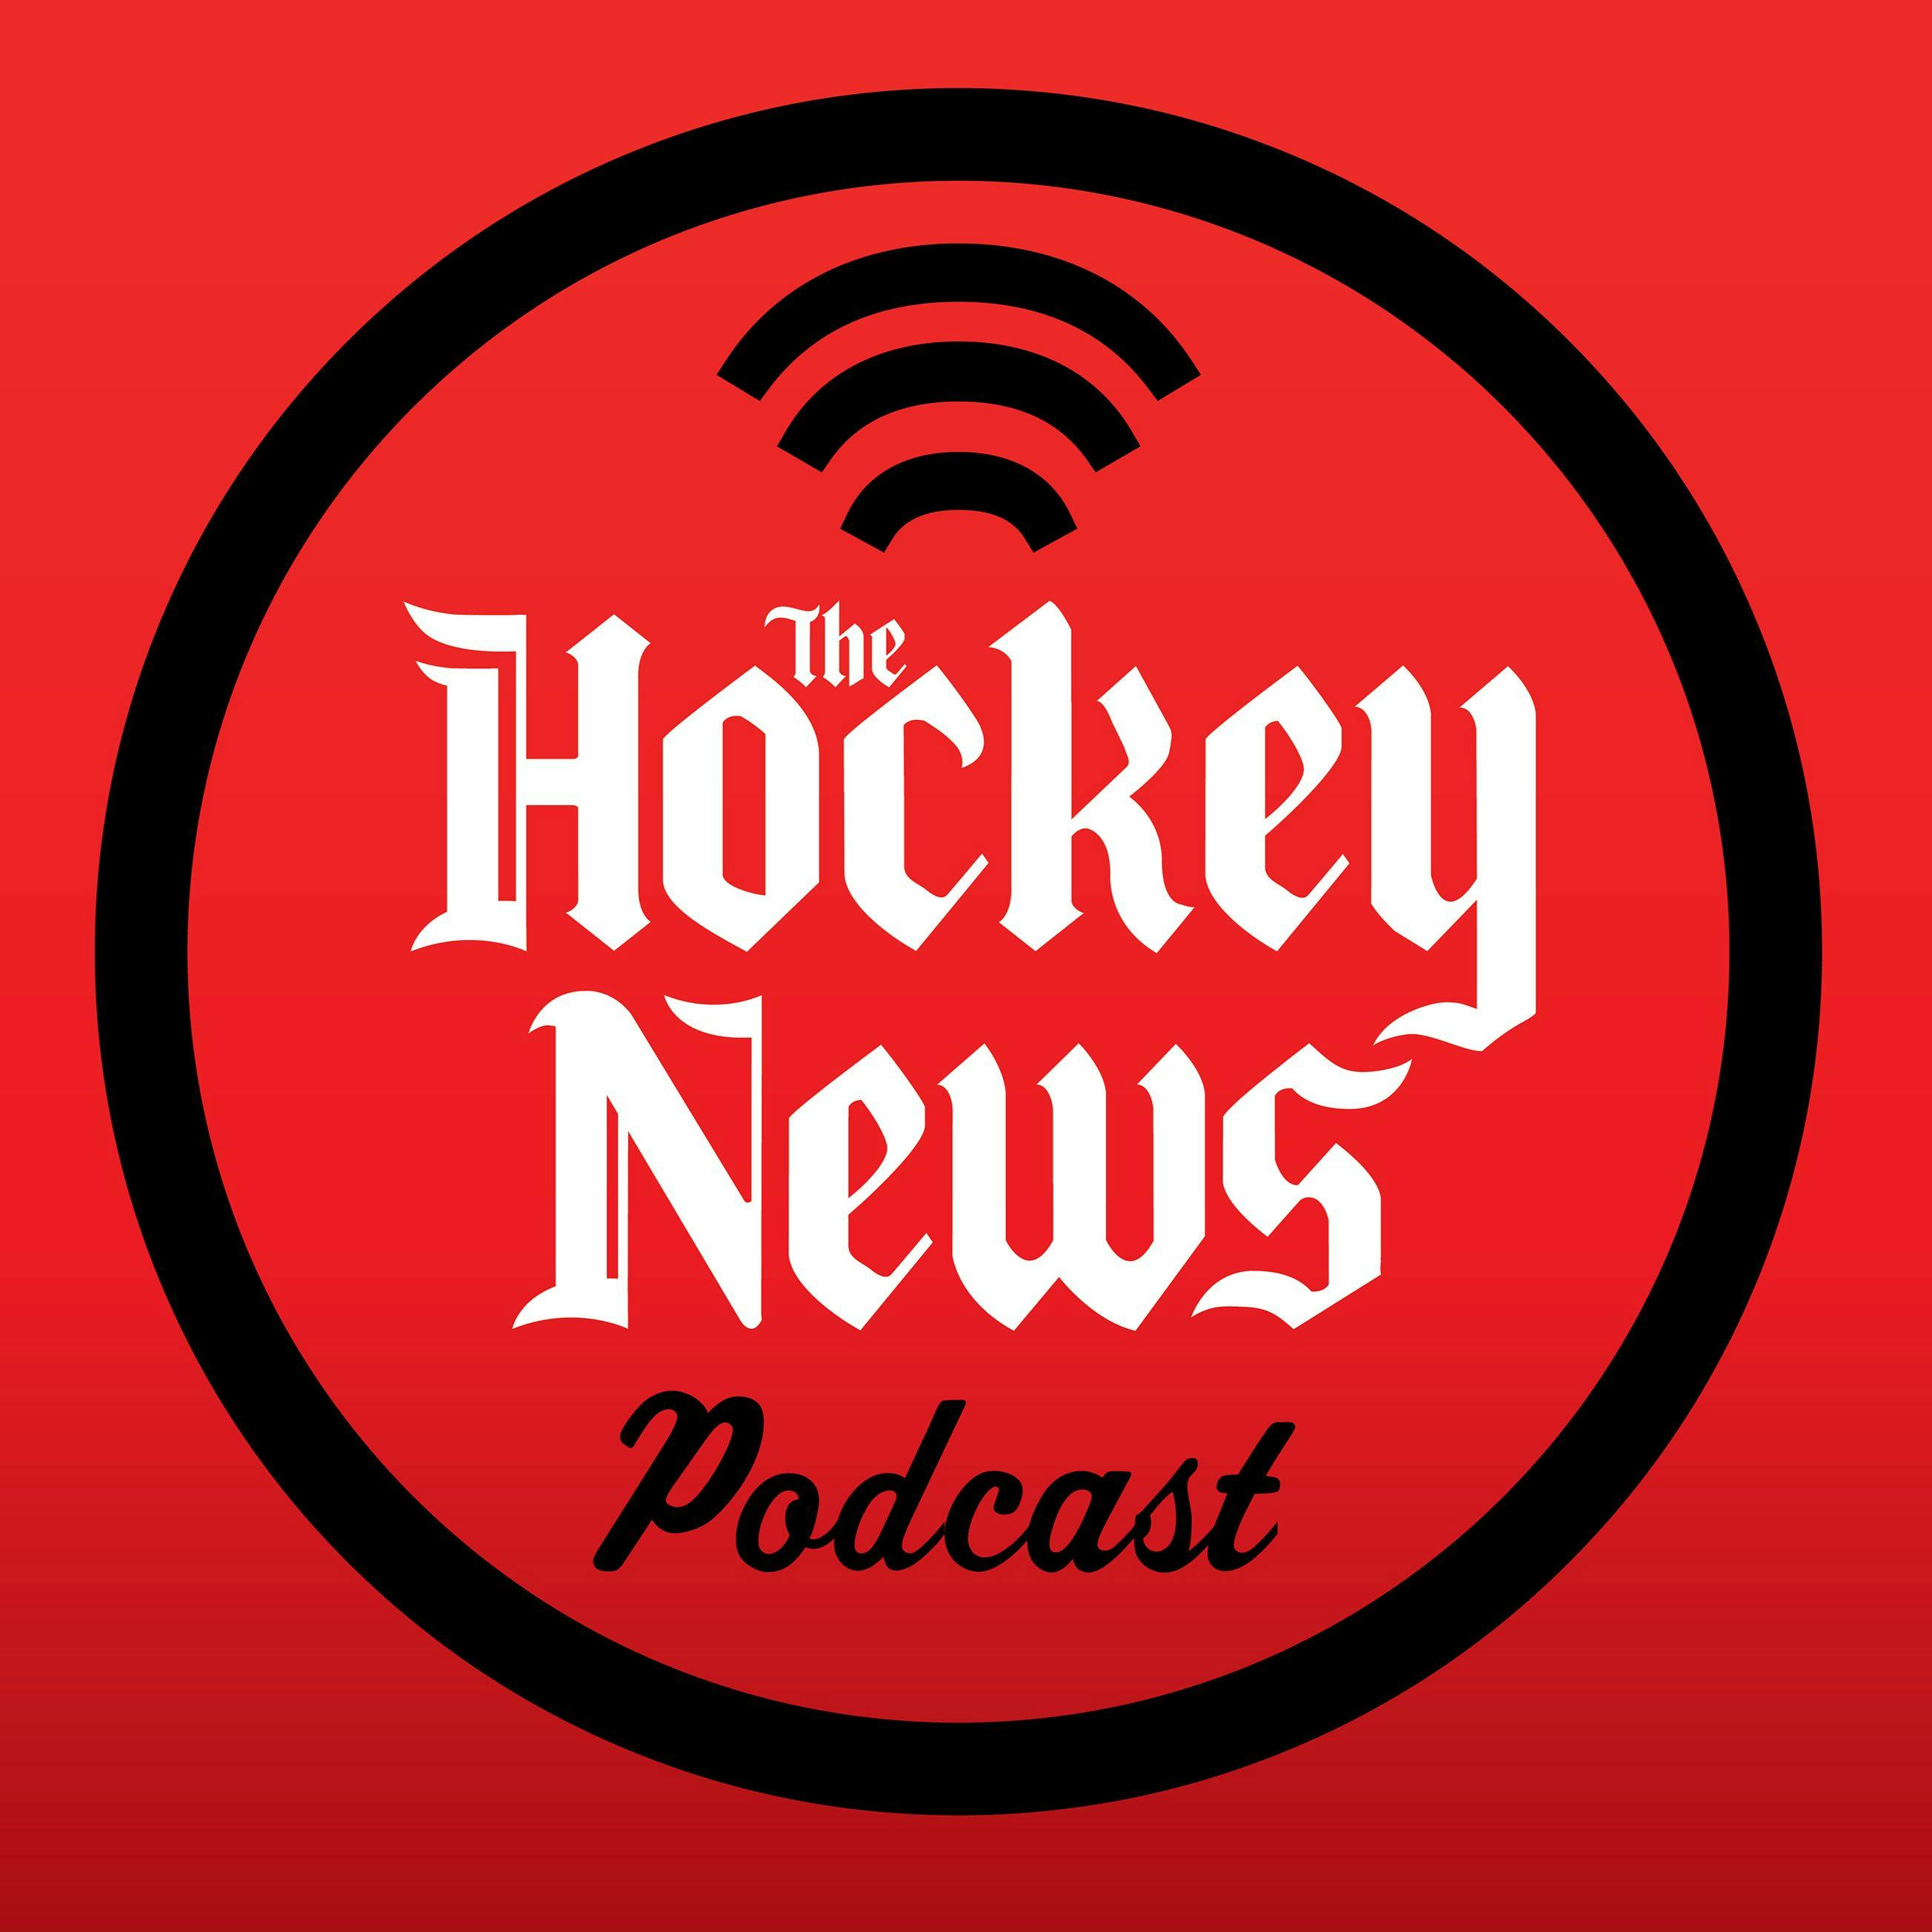 The Hockey News Action Show: NHL Betting for Jan. 21, 2023